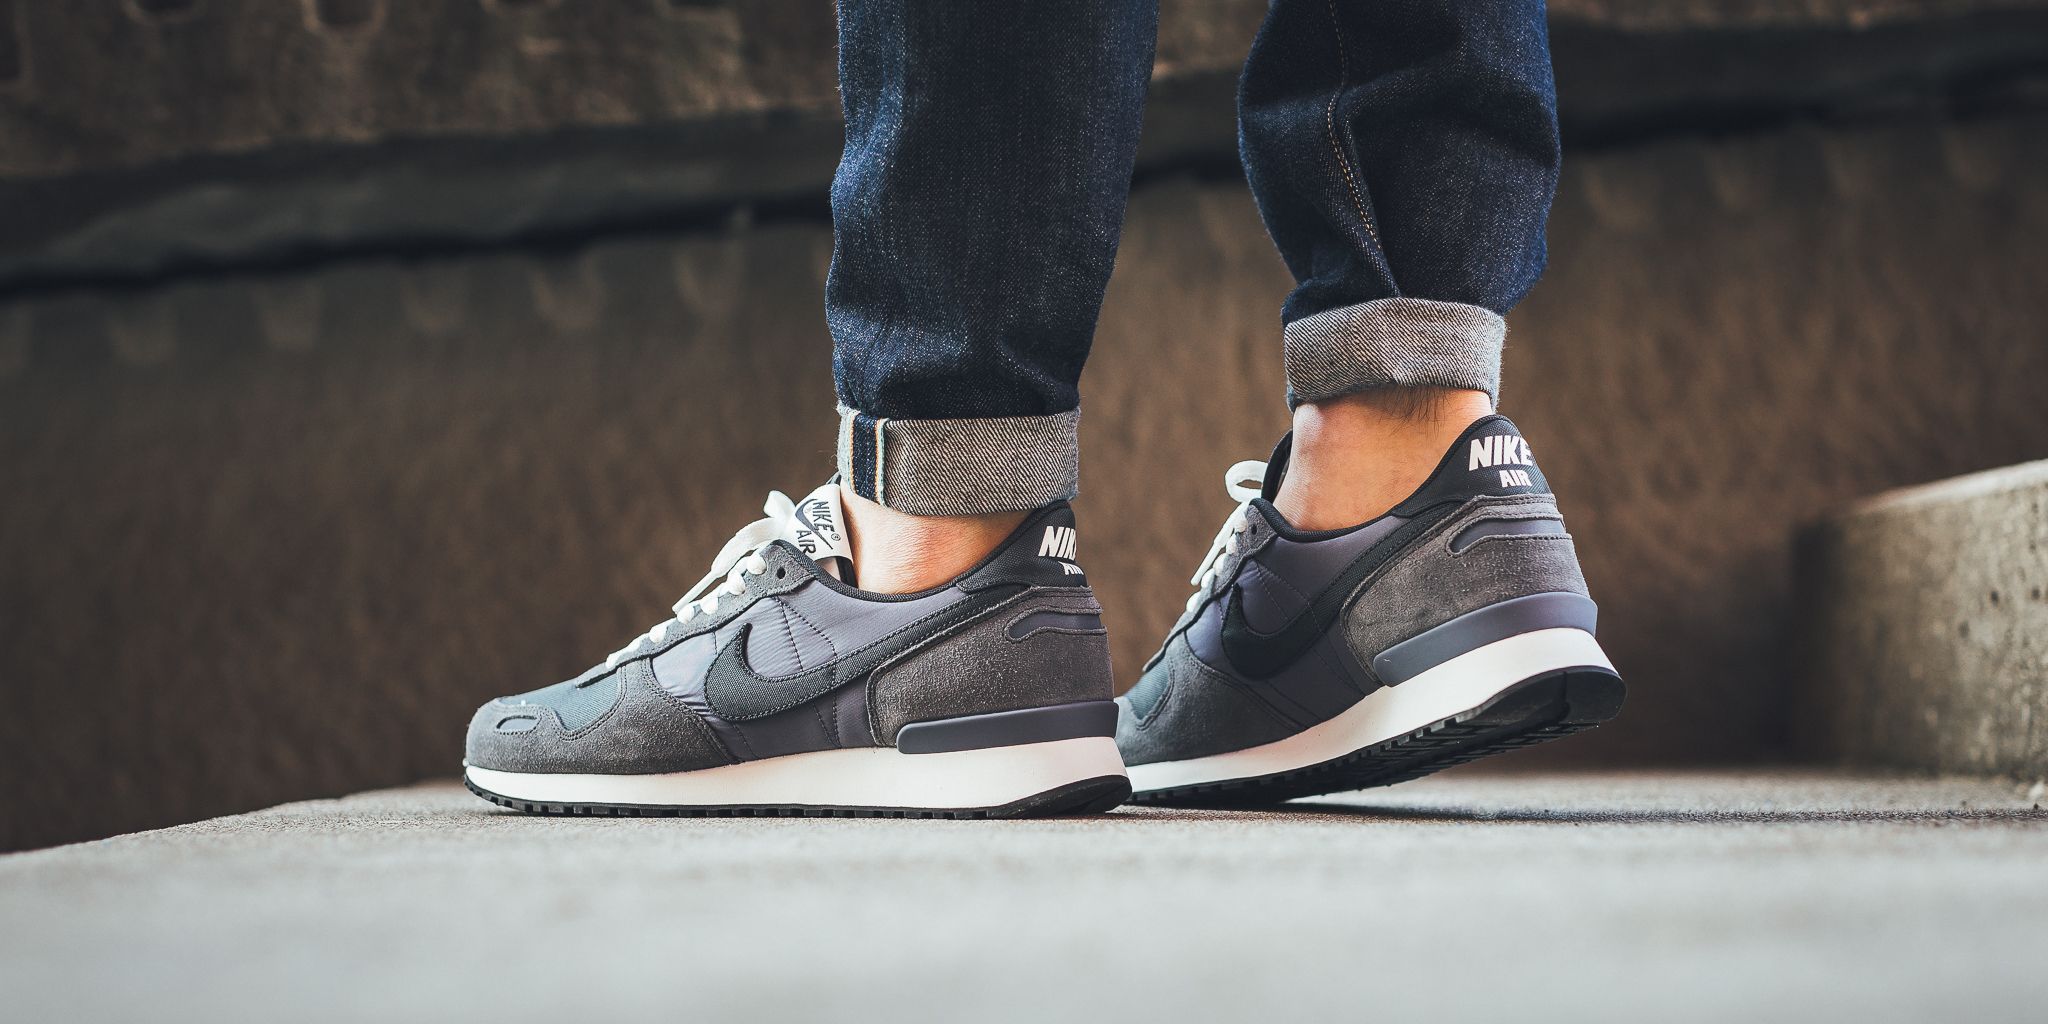 Titolo Twitter: "NEW IN! Nike Air Vortex - Light Carbon/Anthracite-Sail- https://t.co/0WPcBKiqQi https://t.co/AL8Q0WwOTu" / Twitter